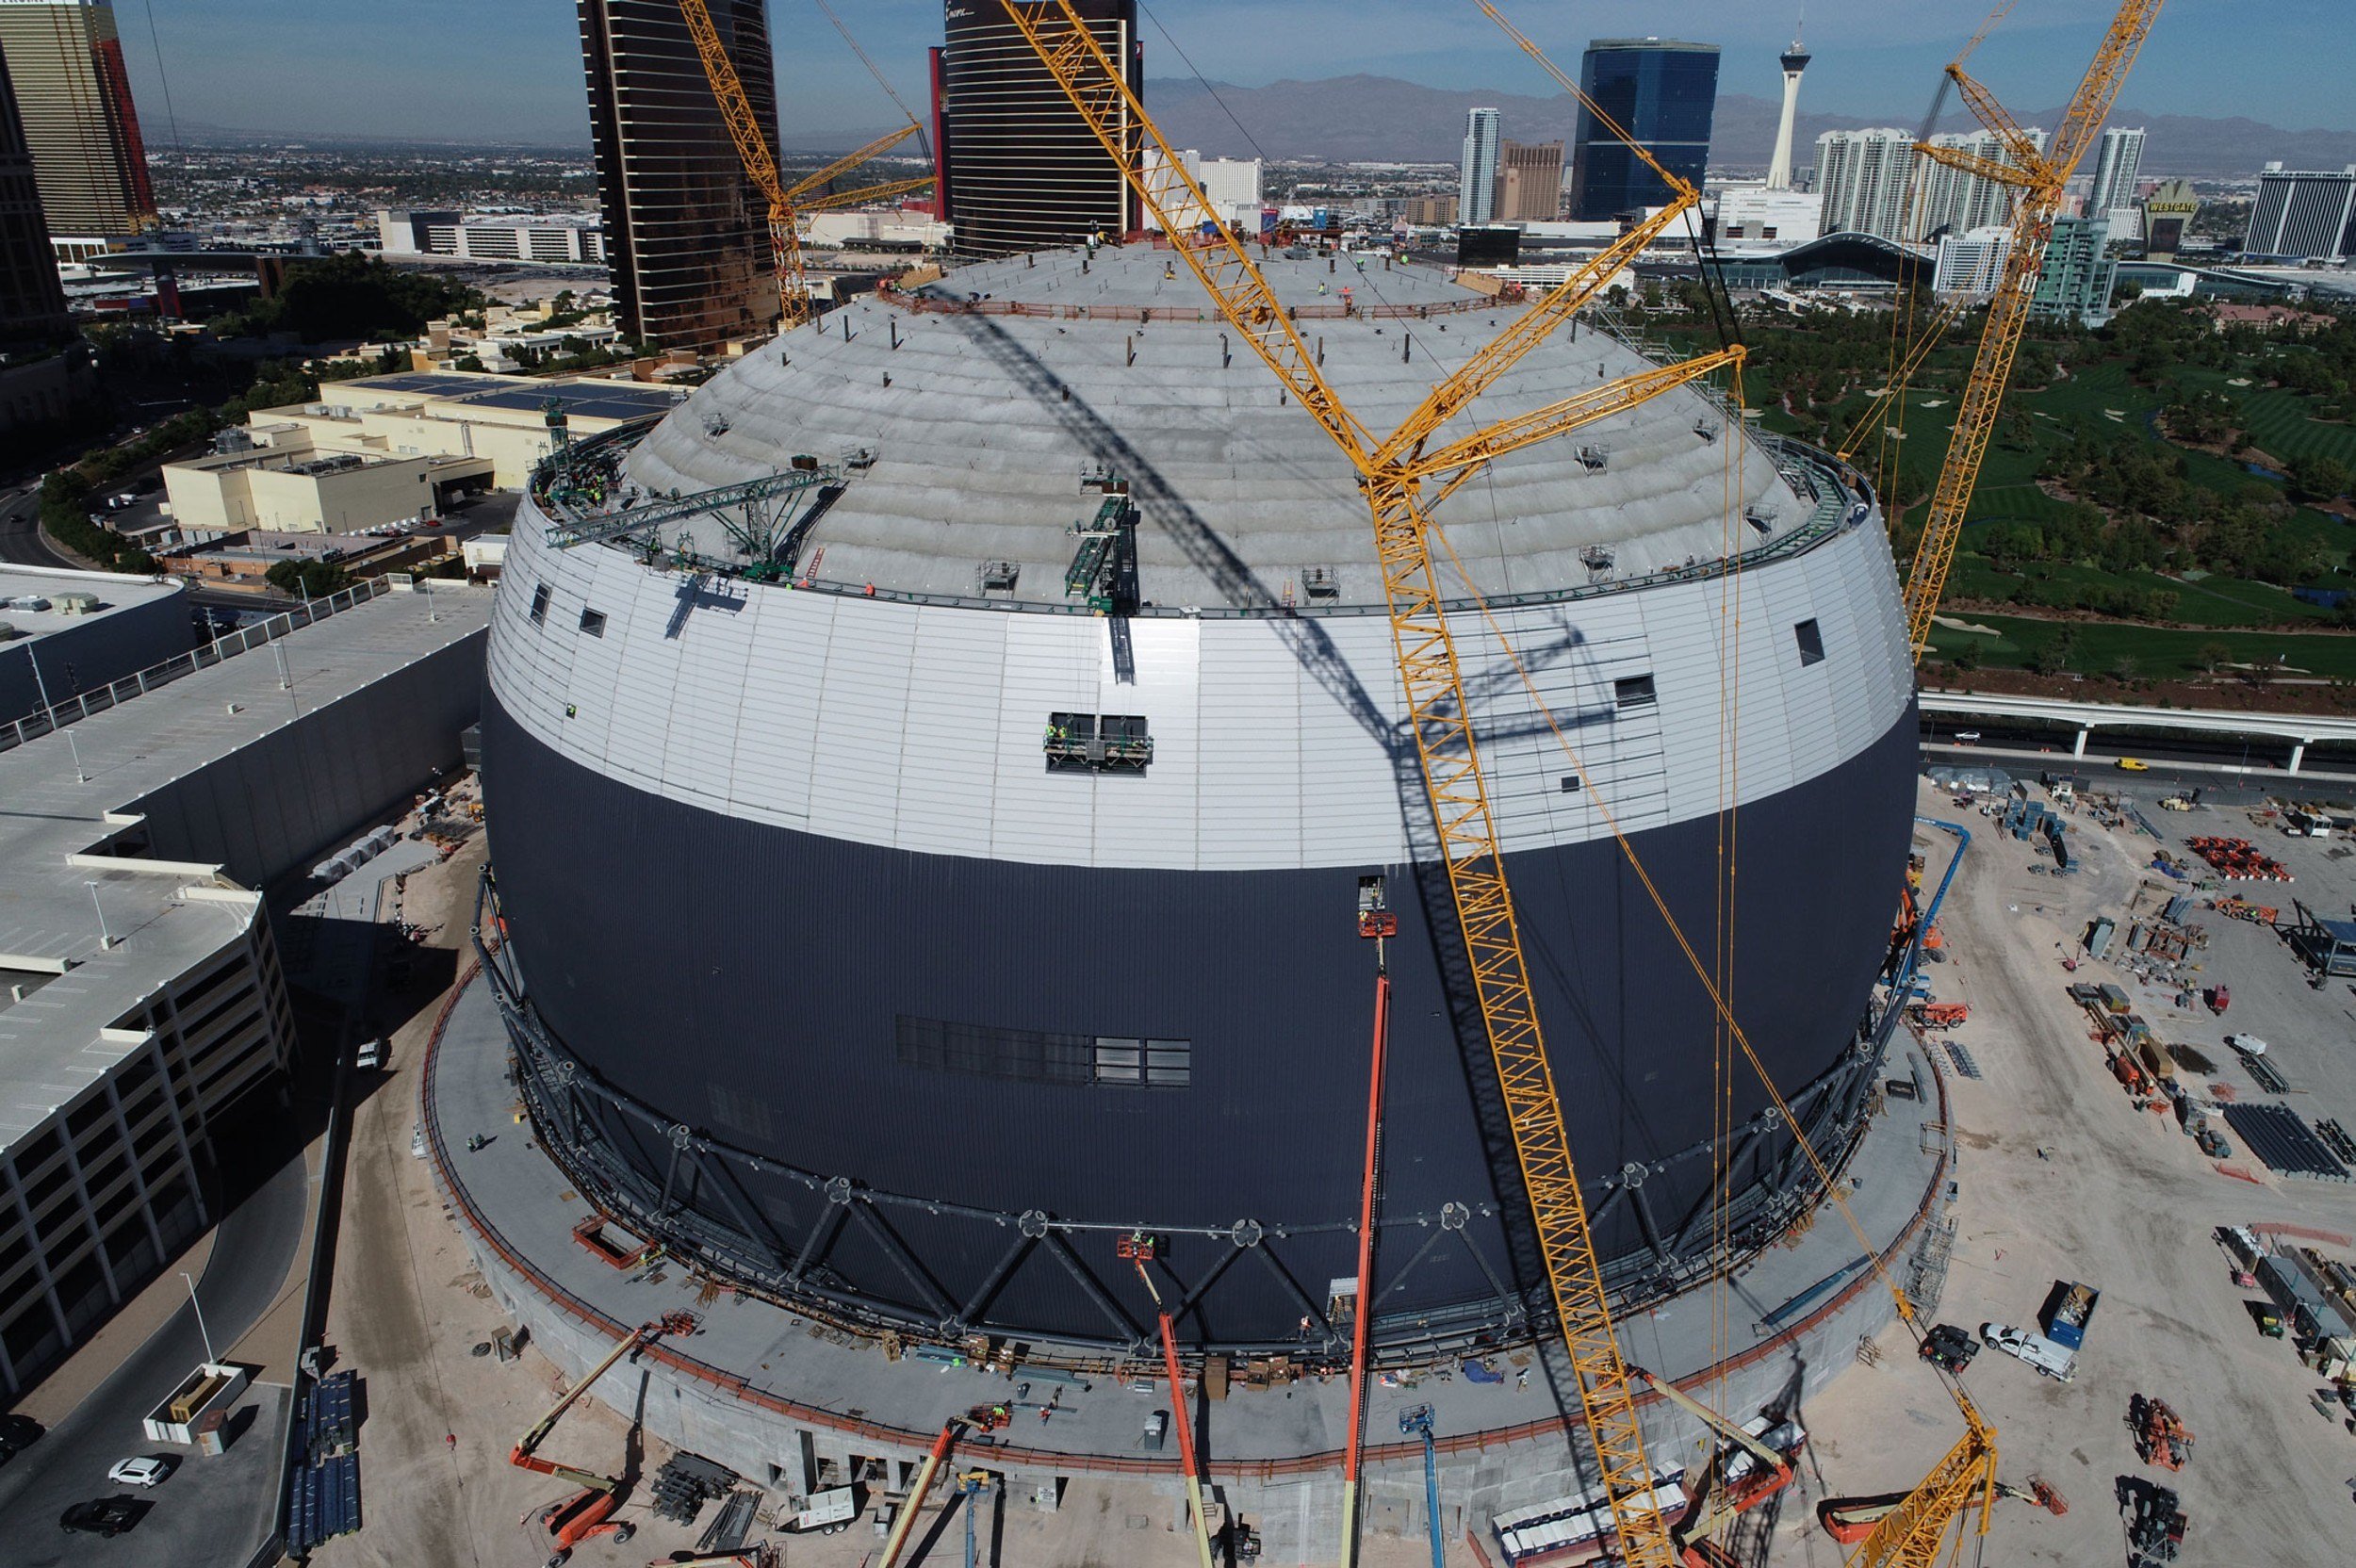 The MSG Sphere is being constructed on 18 of acres of land owned by Vici Properties, the Las Vegas Strip's largest landowner.